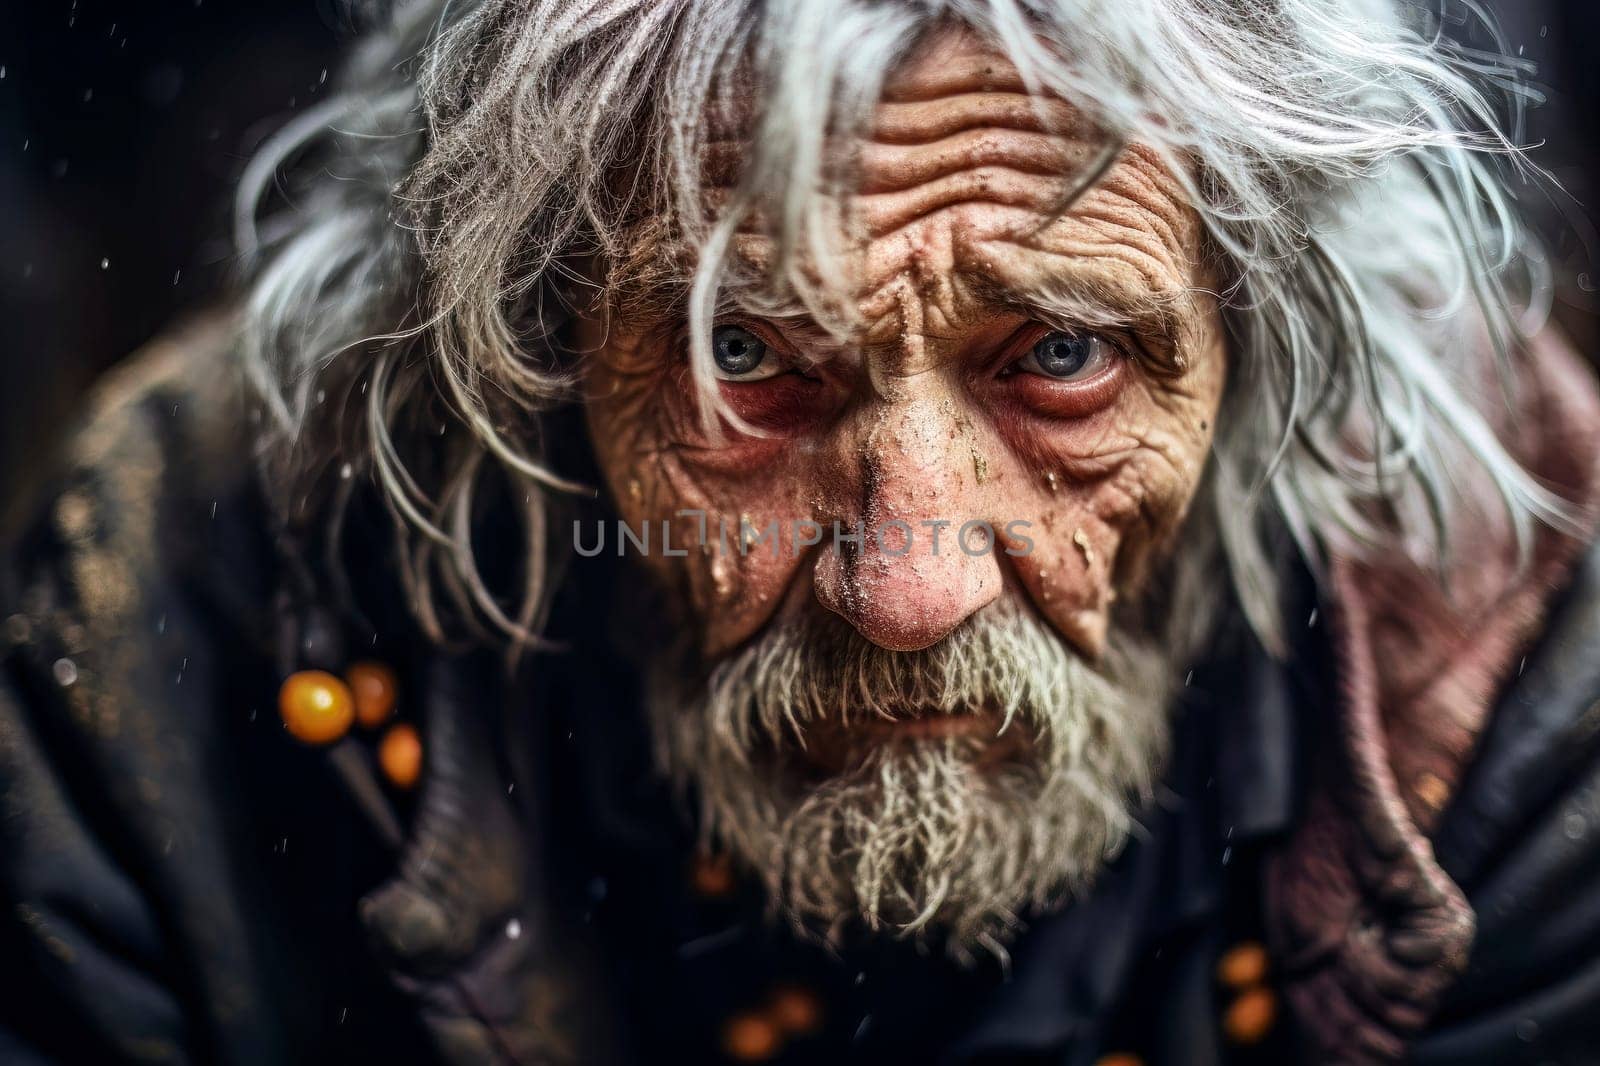 Determined Elderly Man Against System by pippocarlot